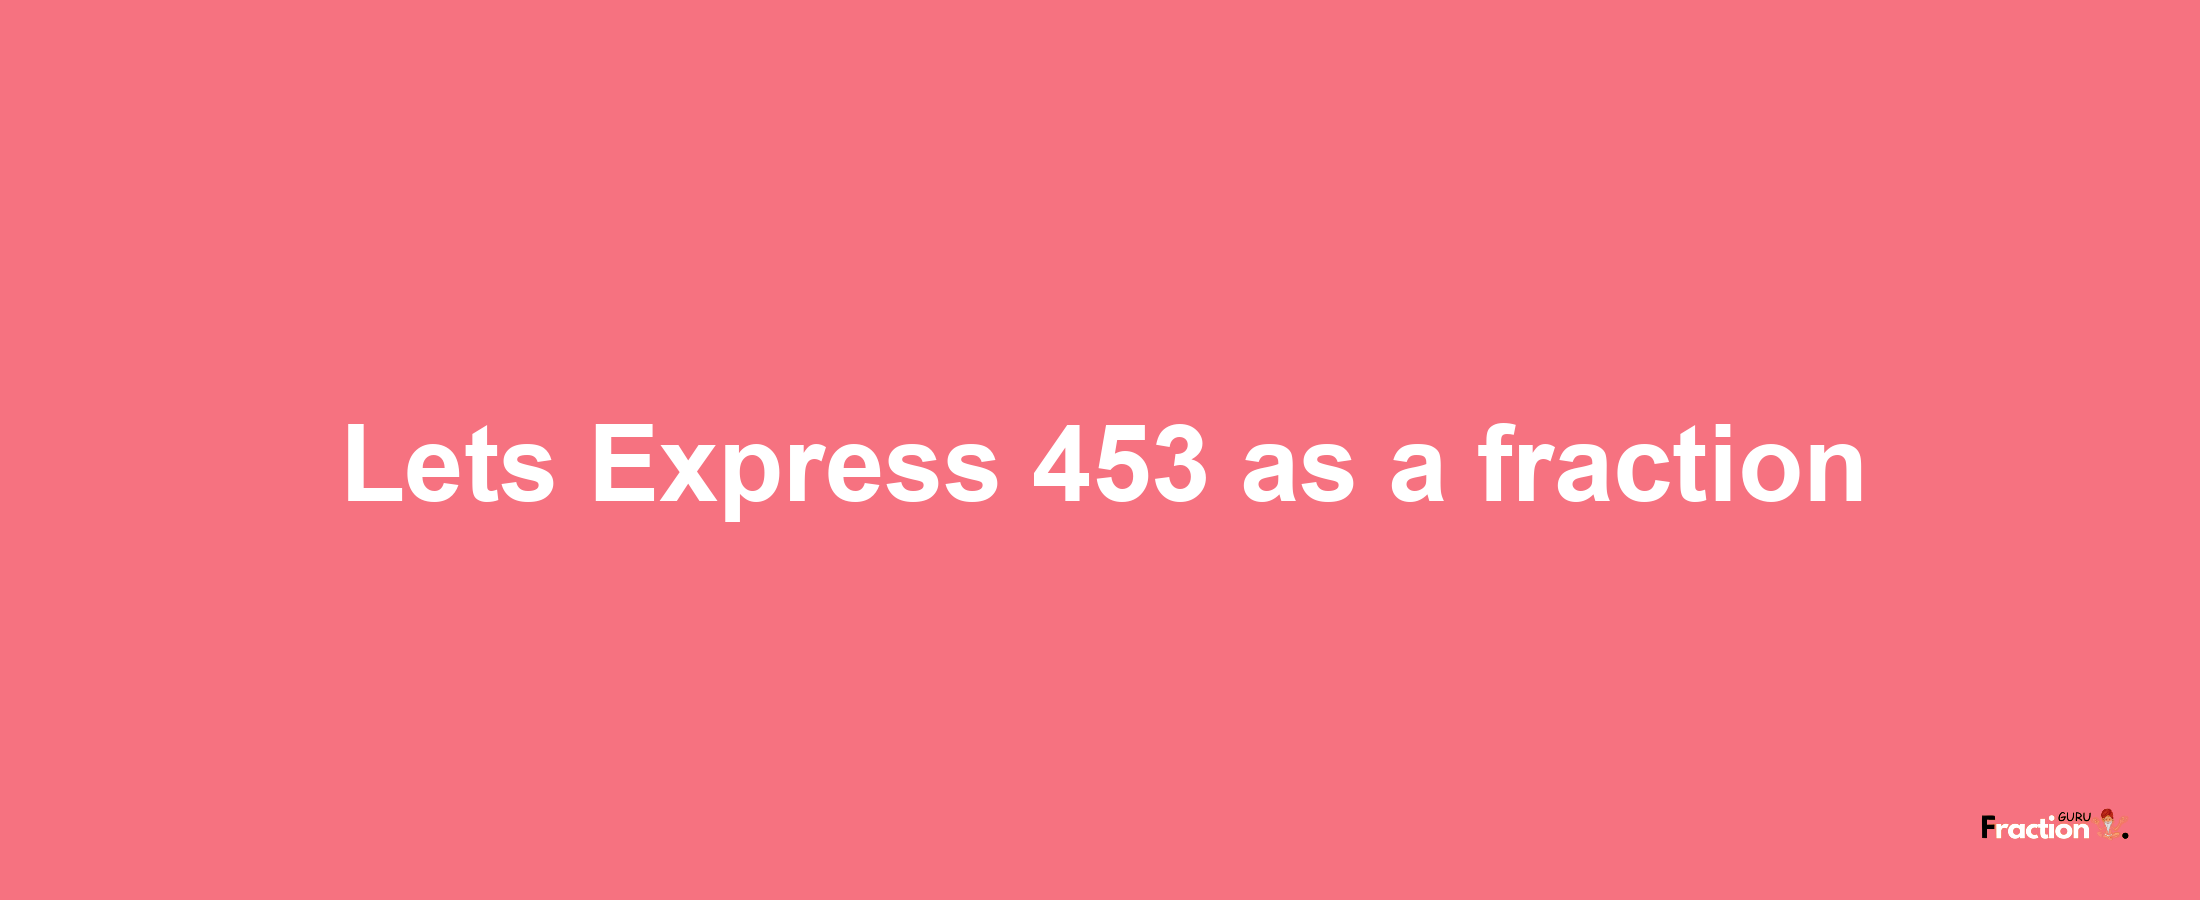 Lets Express 453 as afraction